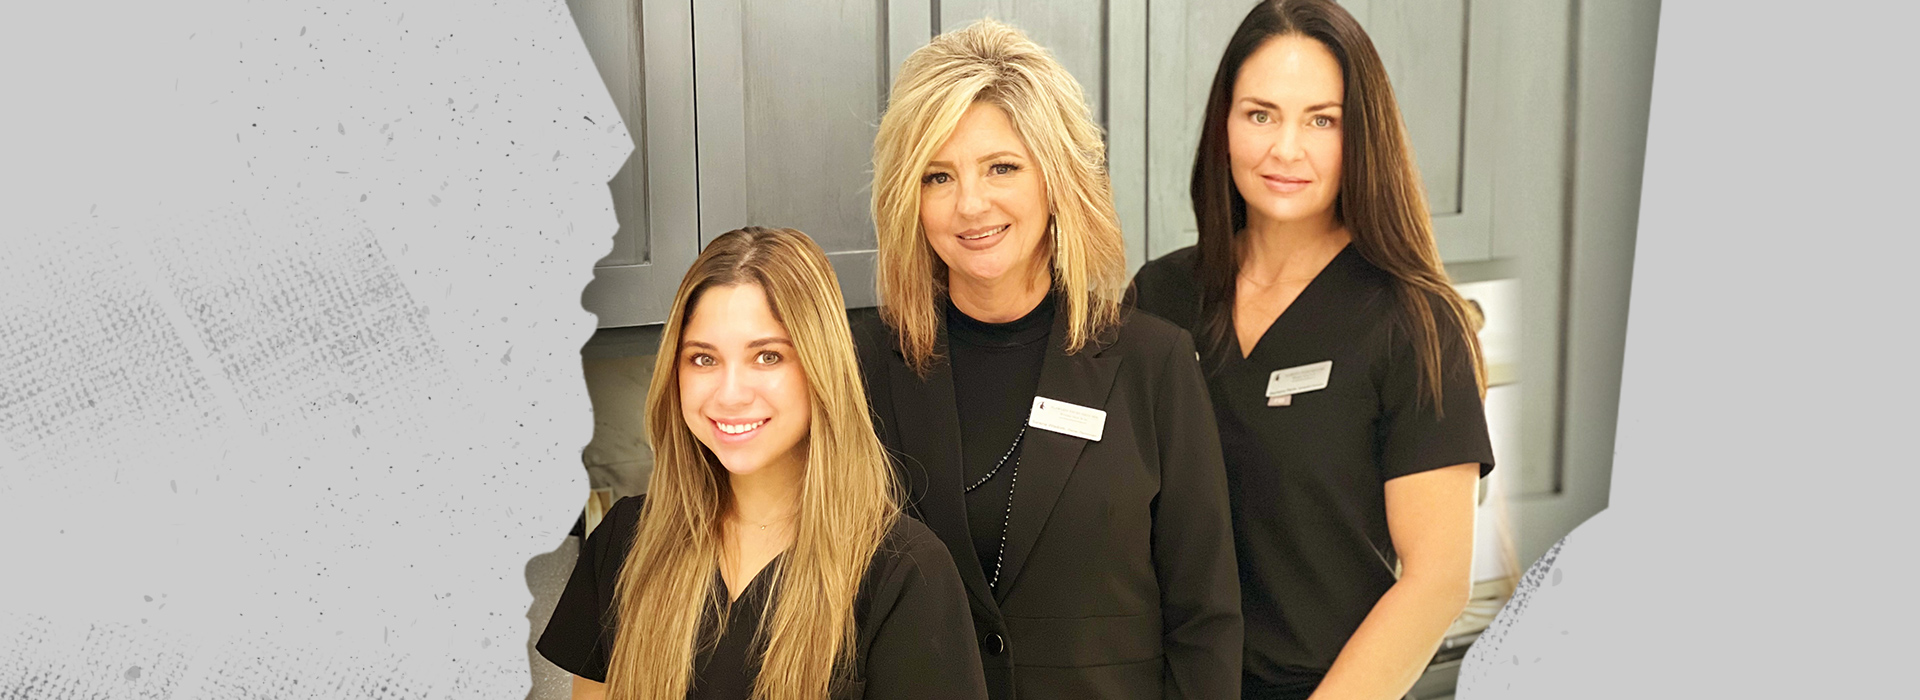 Our Team at Flawless Faces Medi Spa